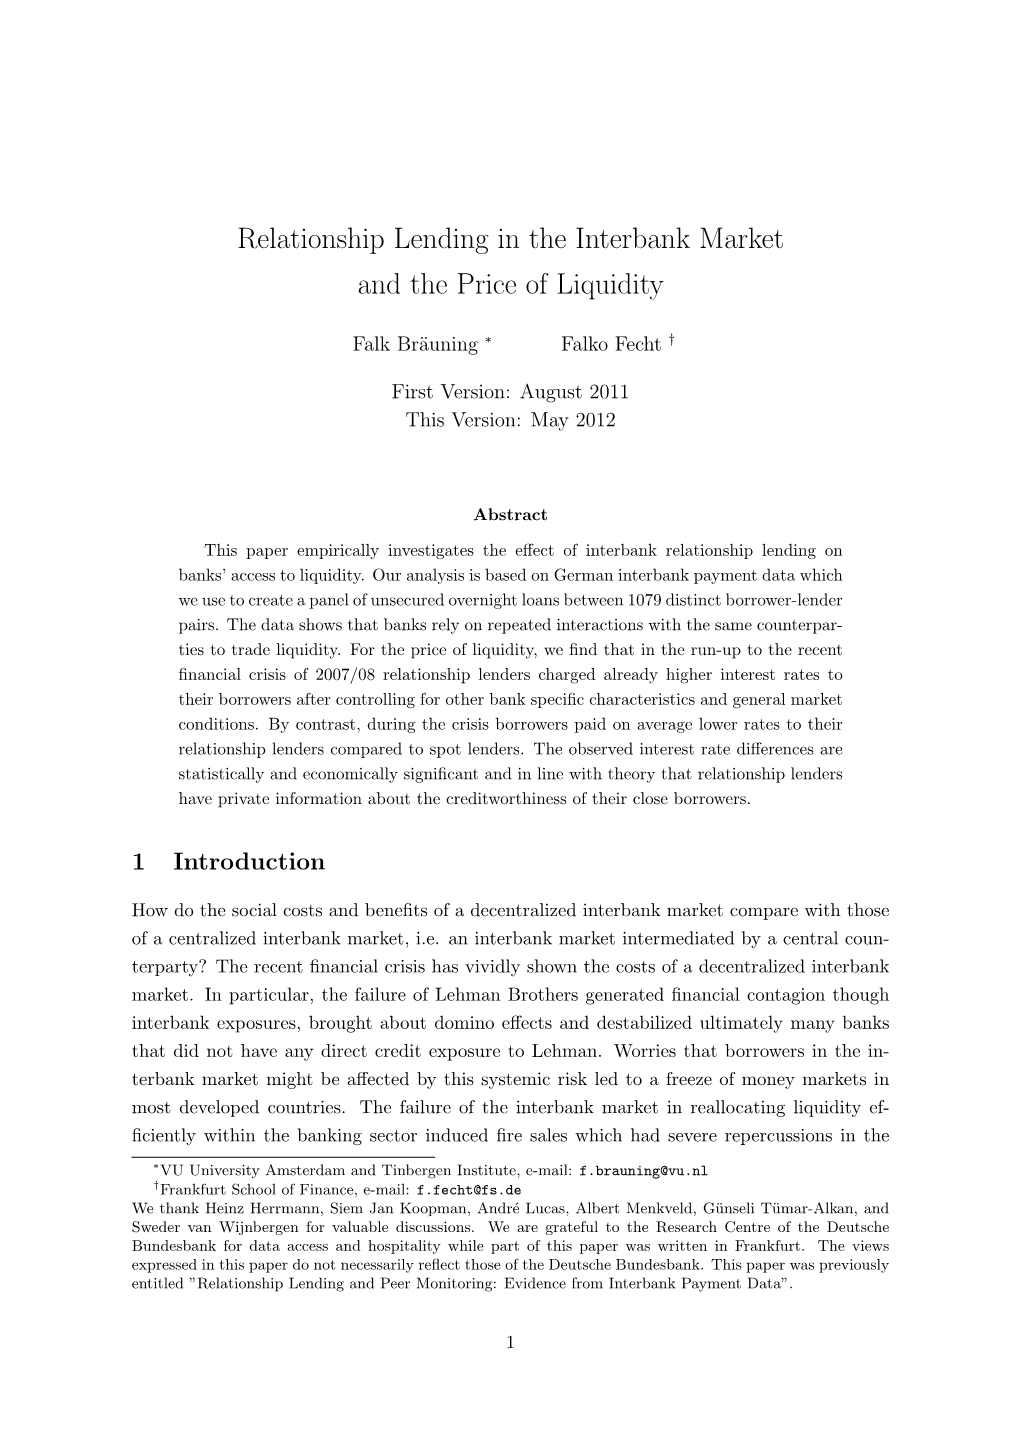 Relationship Lending in the Interbank Market and the Price of Liquidity